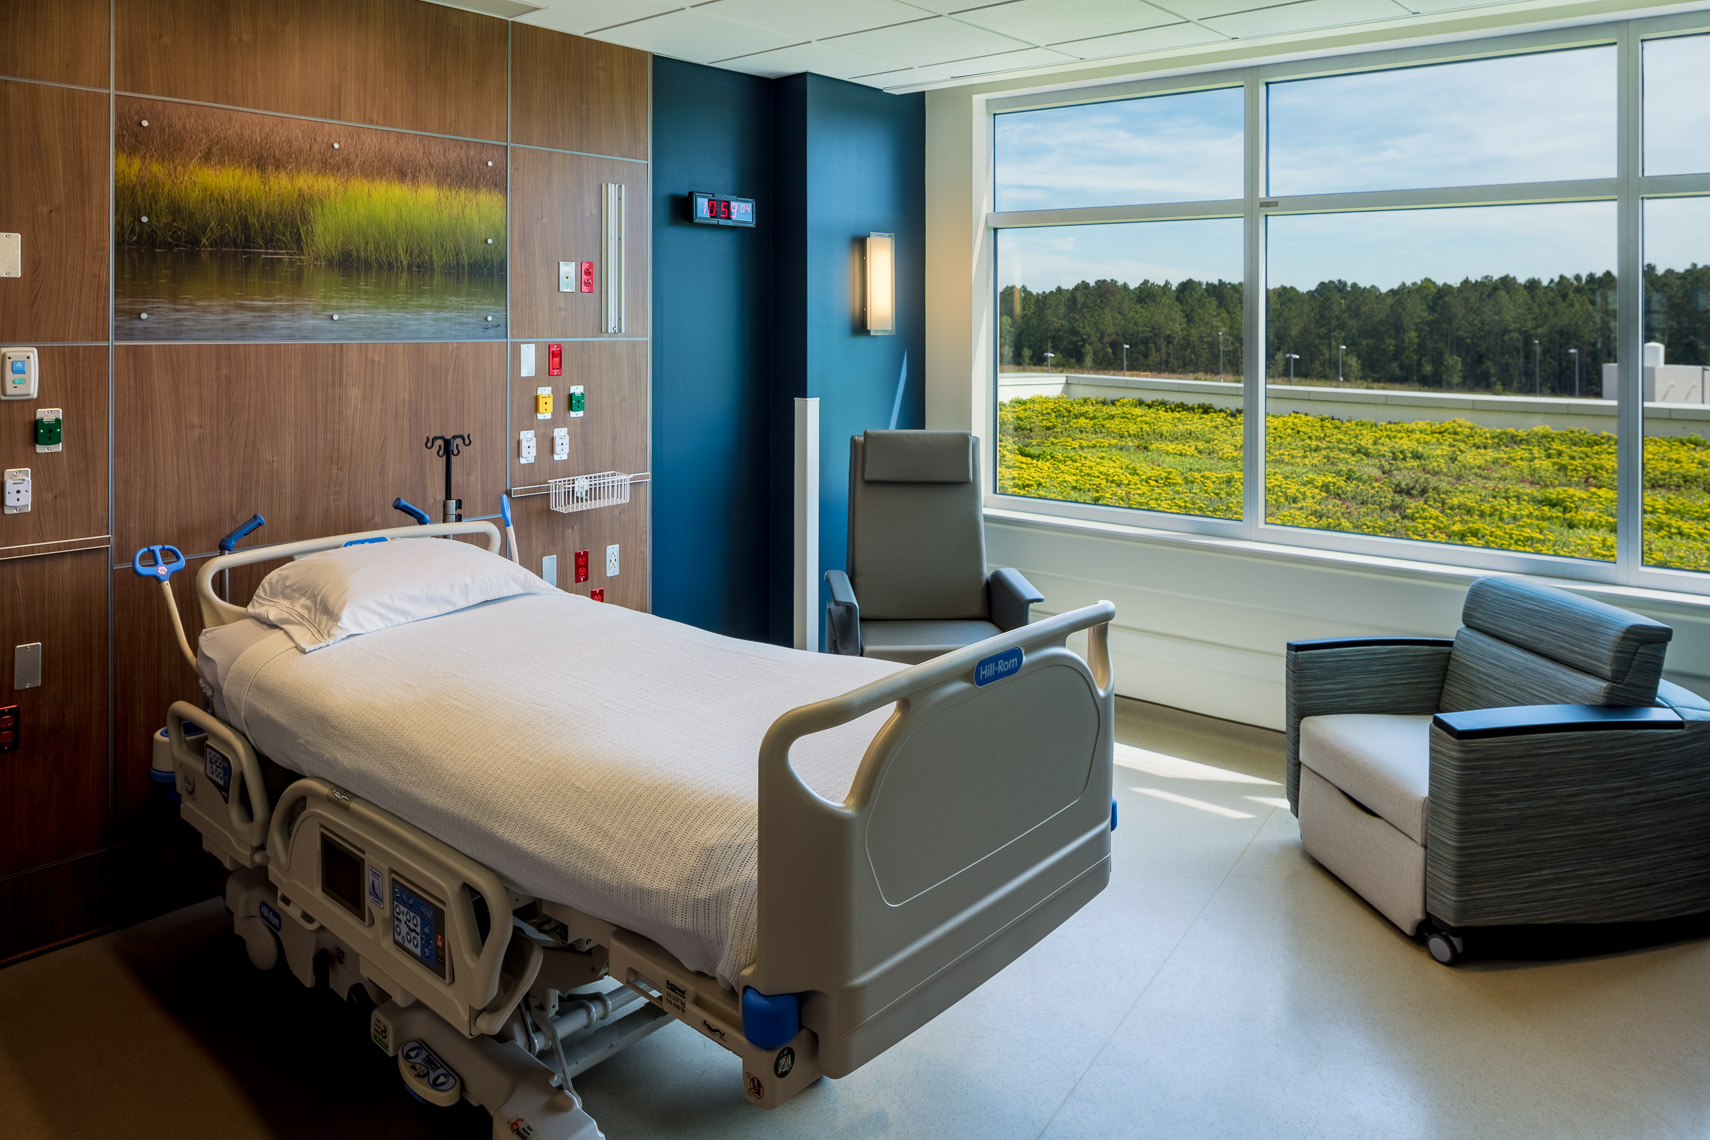 A patient room interior in a hospital